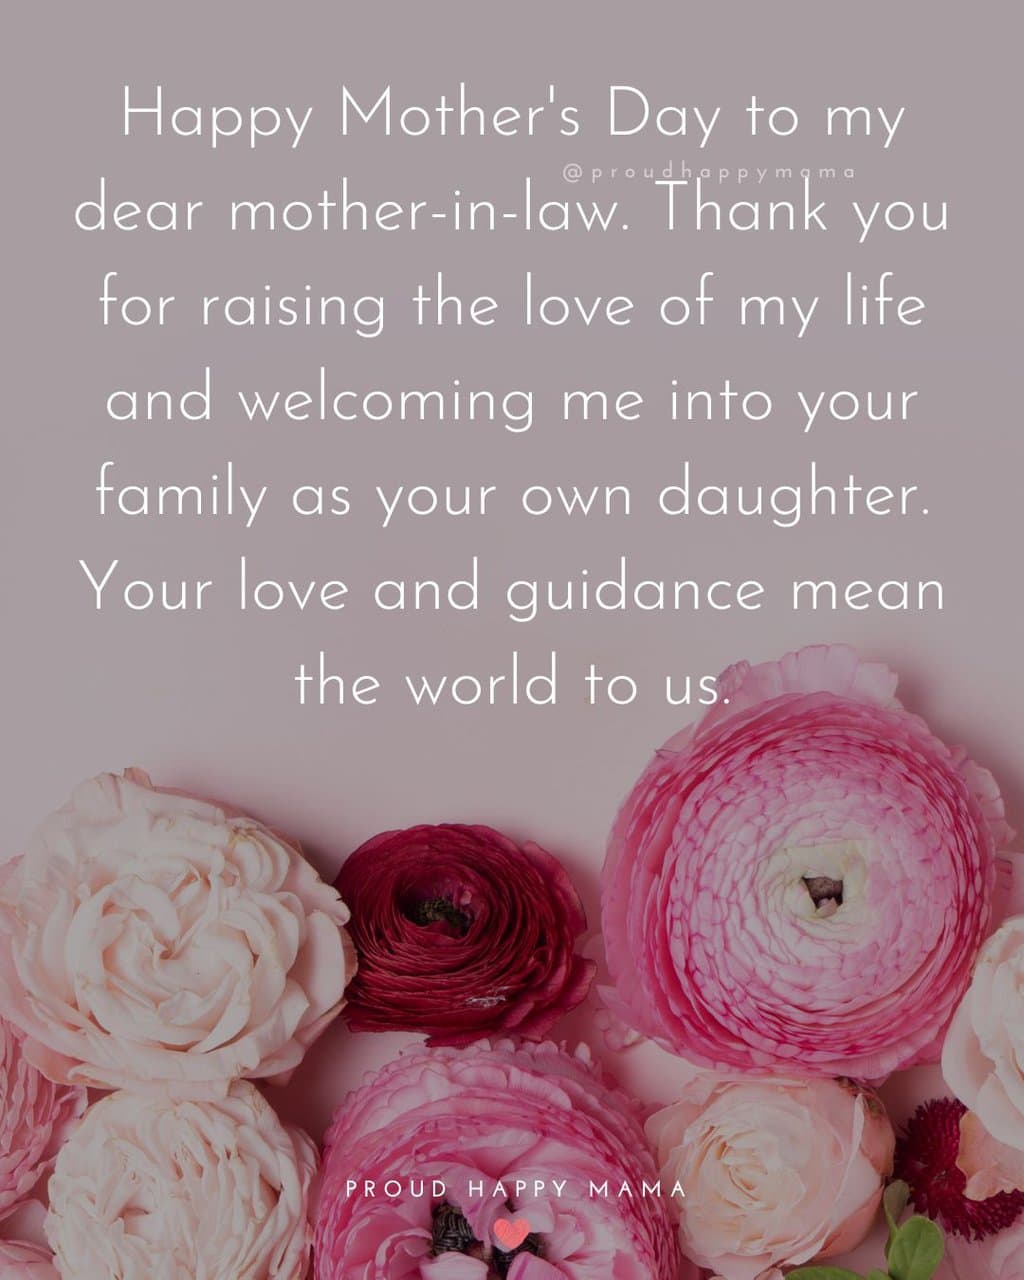 Mother's day quotes for mother-in-law from daughter